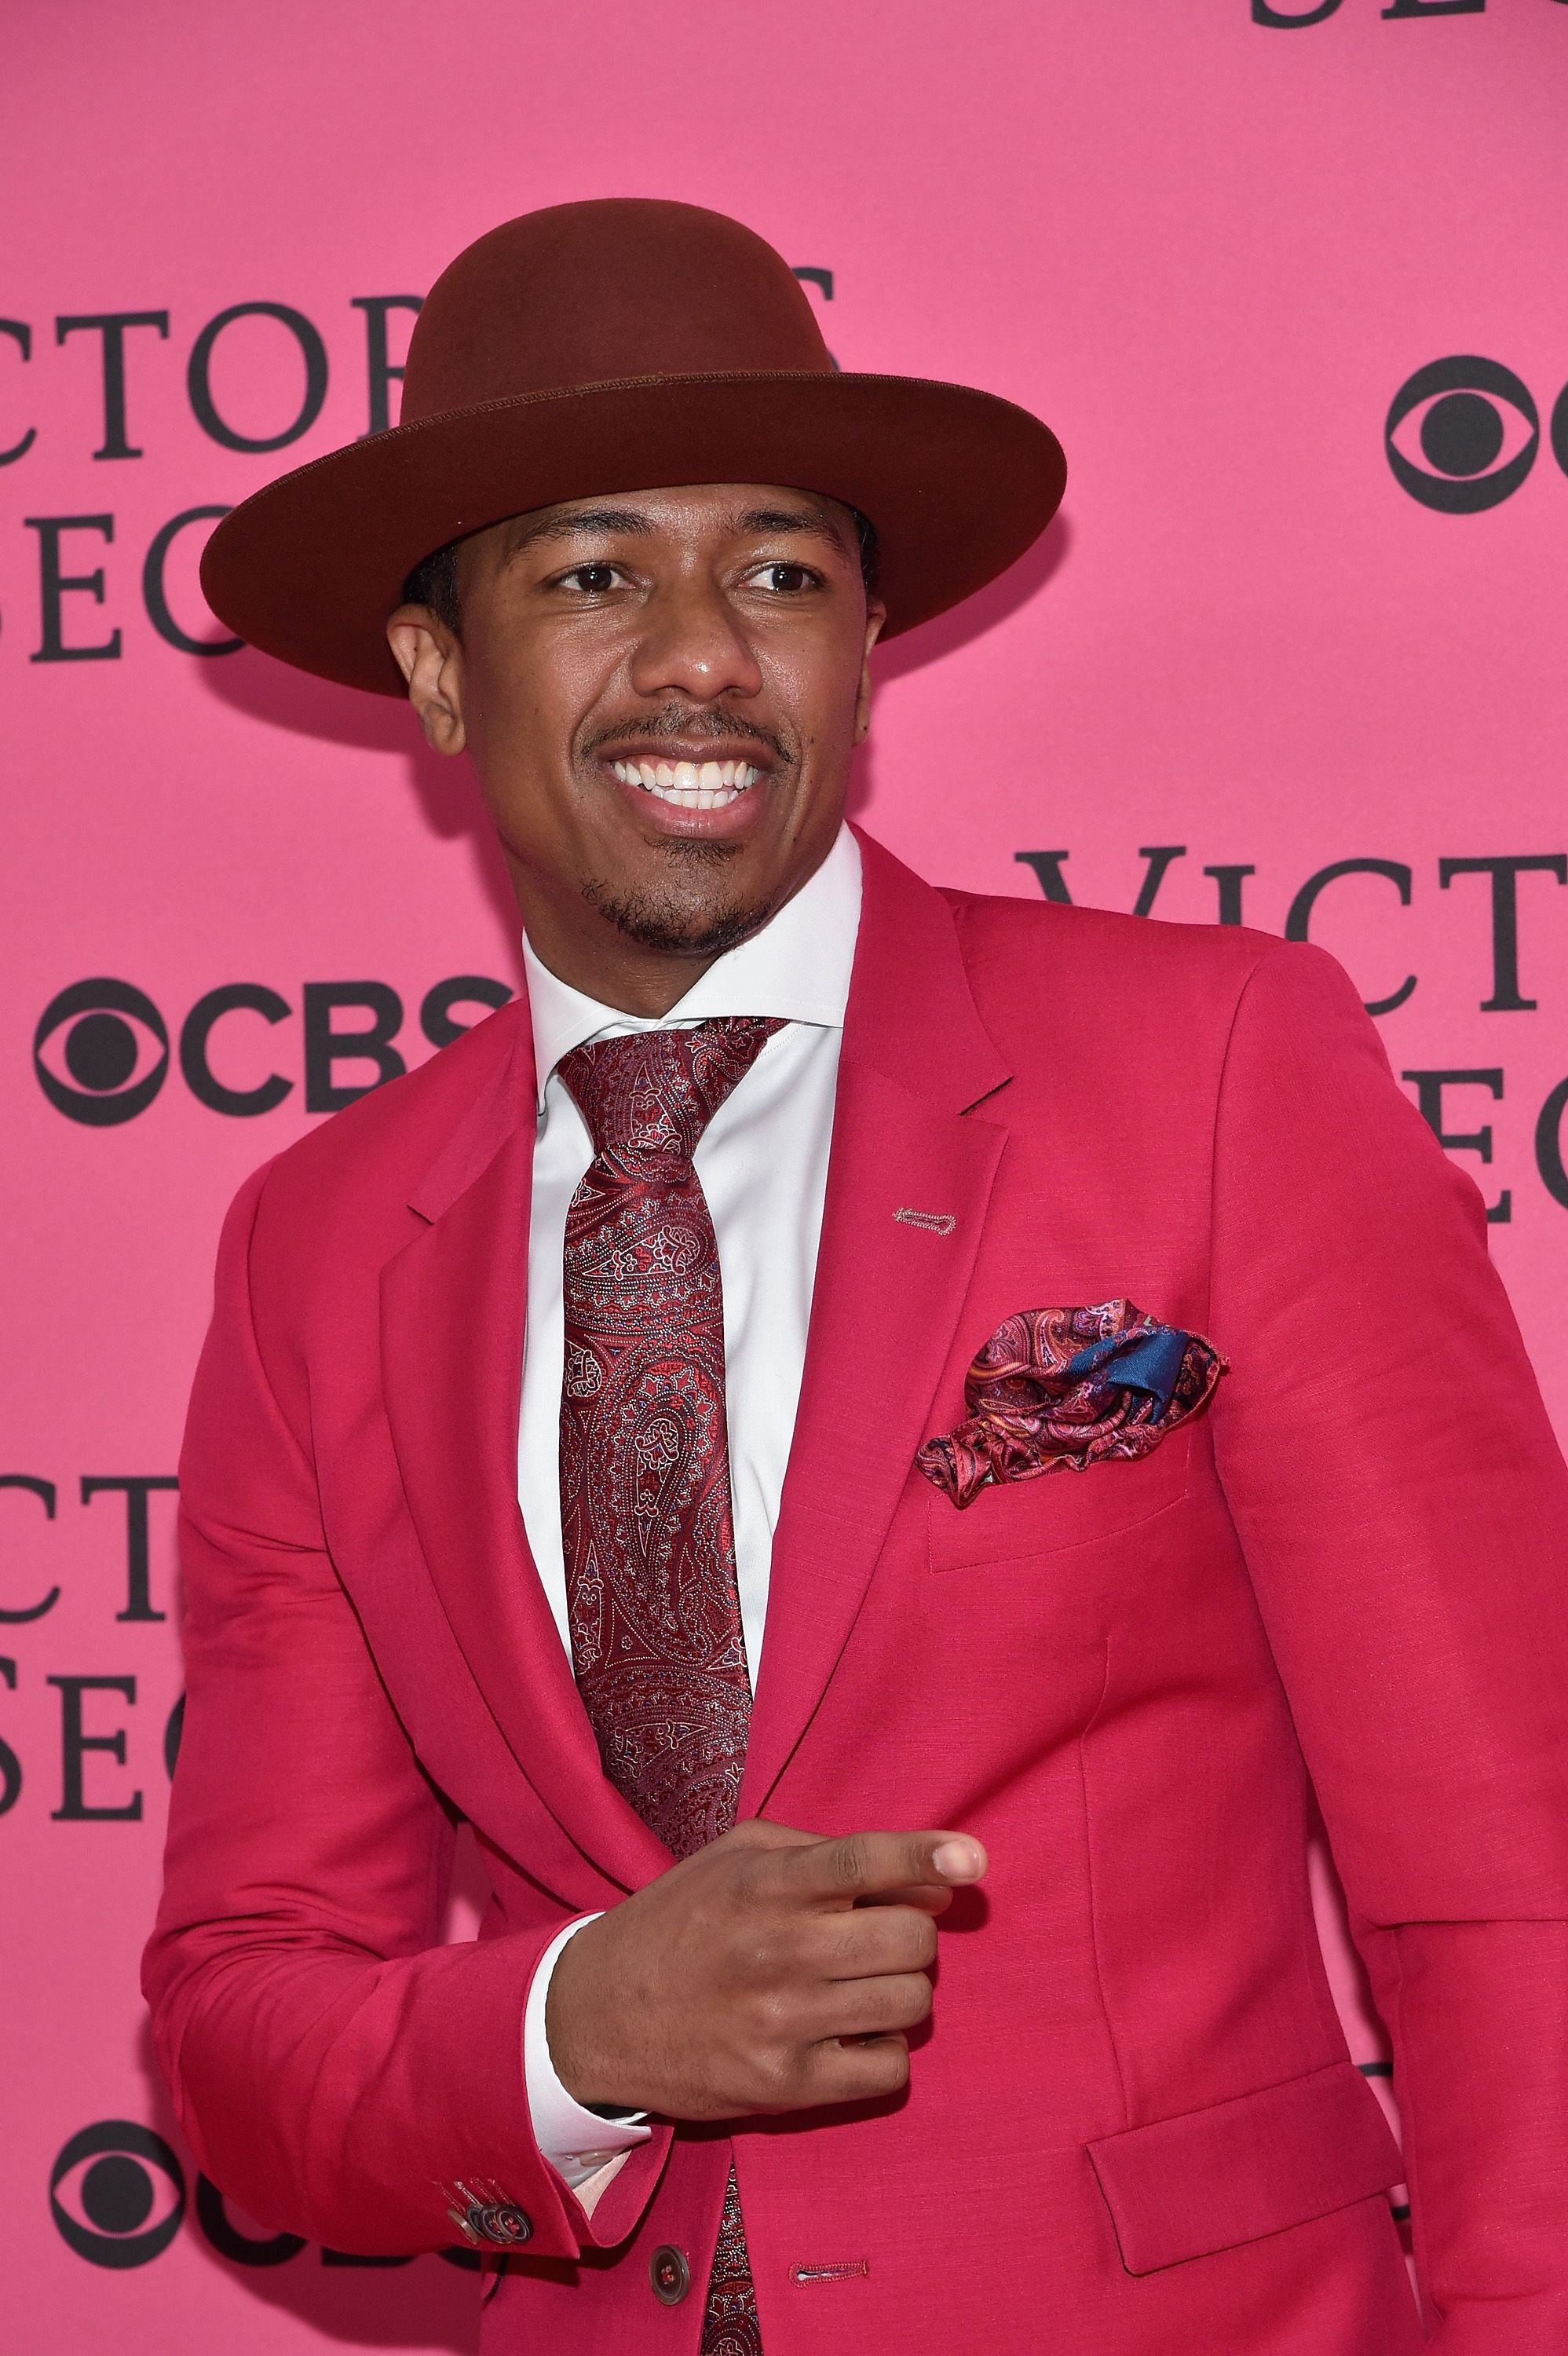 Nick Cannon at a fashion show on November 10, 2015 in New York. | Photo: Getty Images